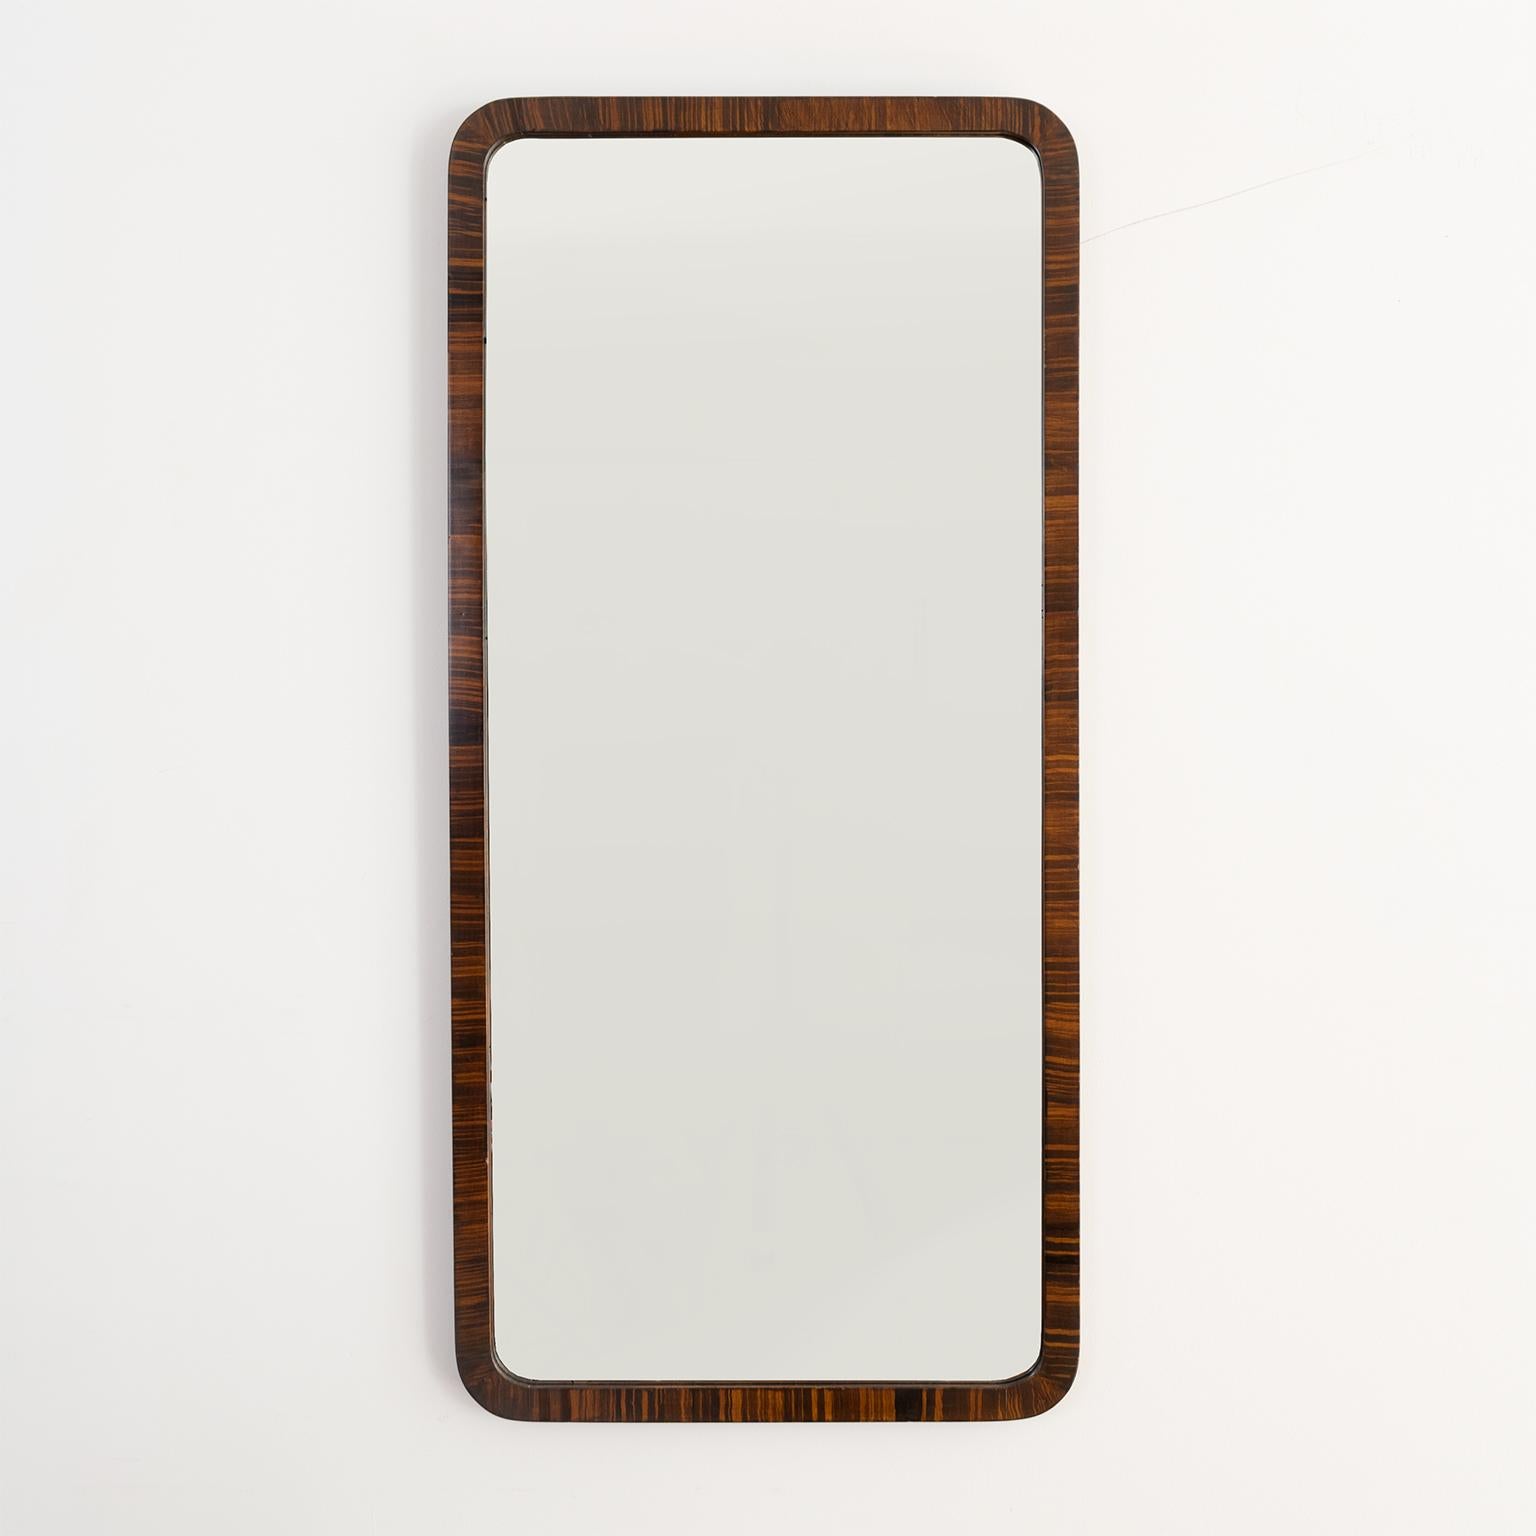 Scandinavian Modern, Swedish modernist, Minimalist mirror with rounded corners. The frame is expertly painted faux Macassar. Original 1930s frame and mirror glass. 

Measures: Height 42